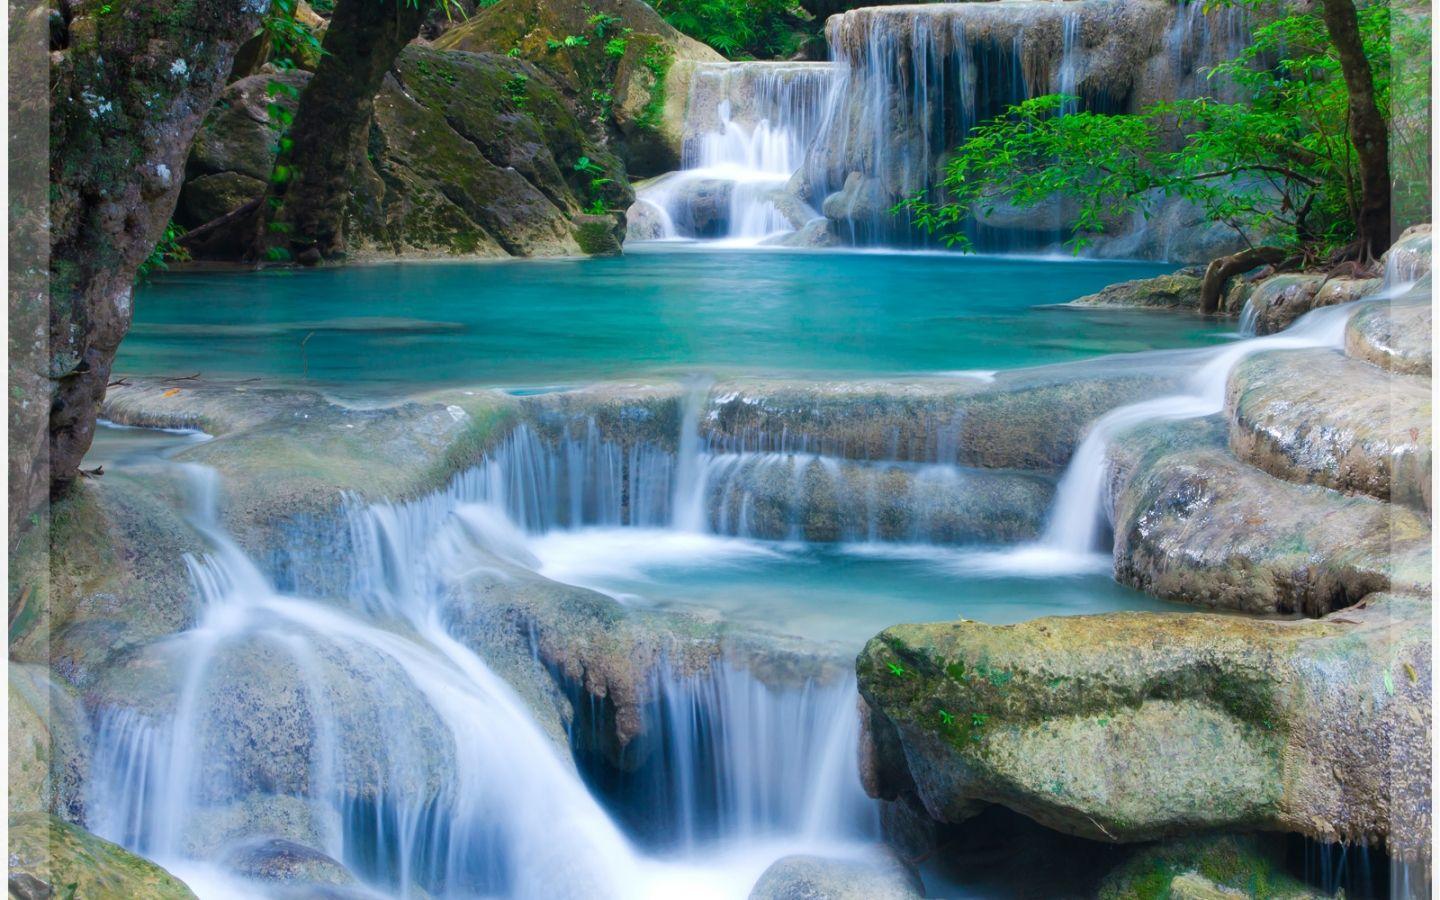 Moving Waterfall Wallpapers - Top Free Moving Waterfall Backgrounds